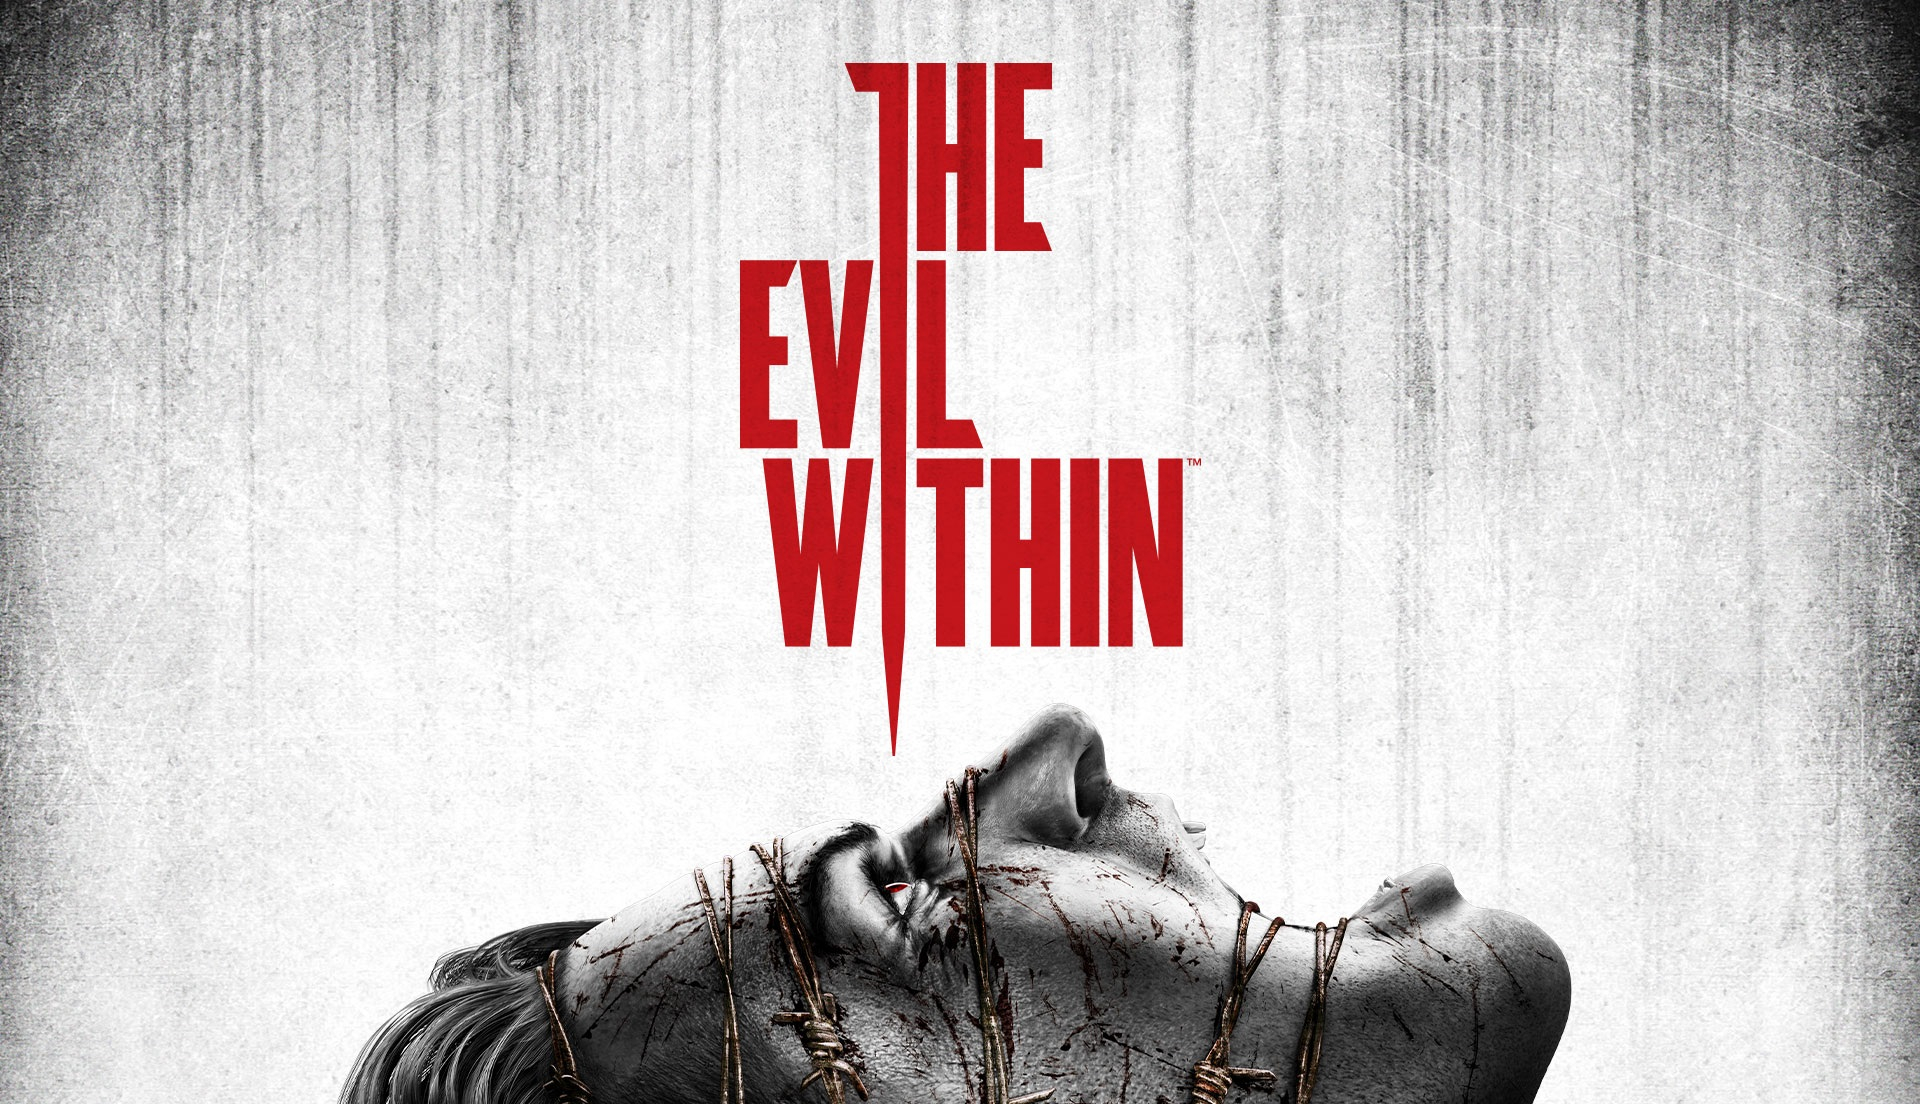 Трейлер #2 Evil Within, The